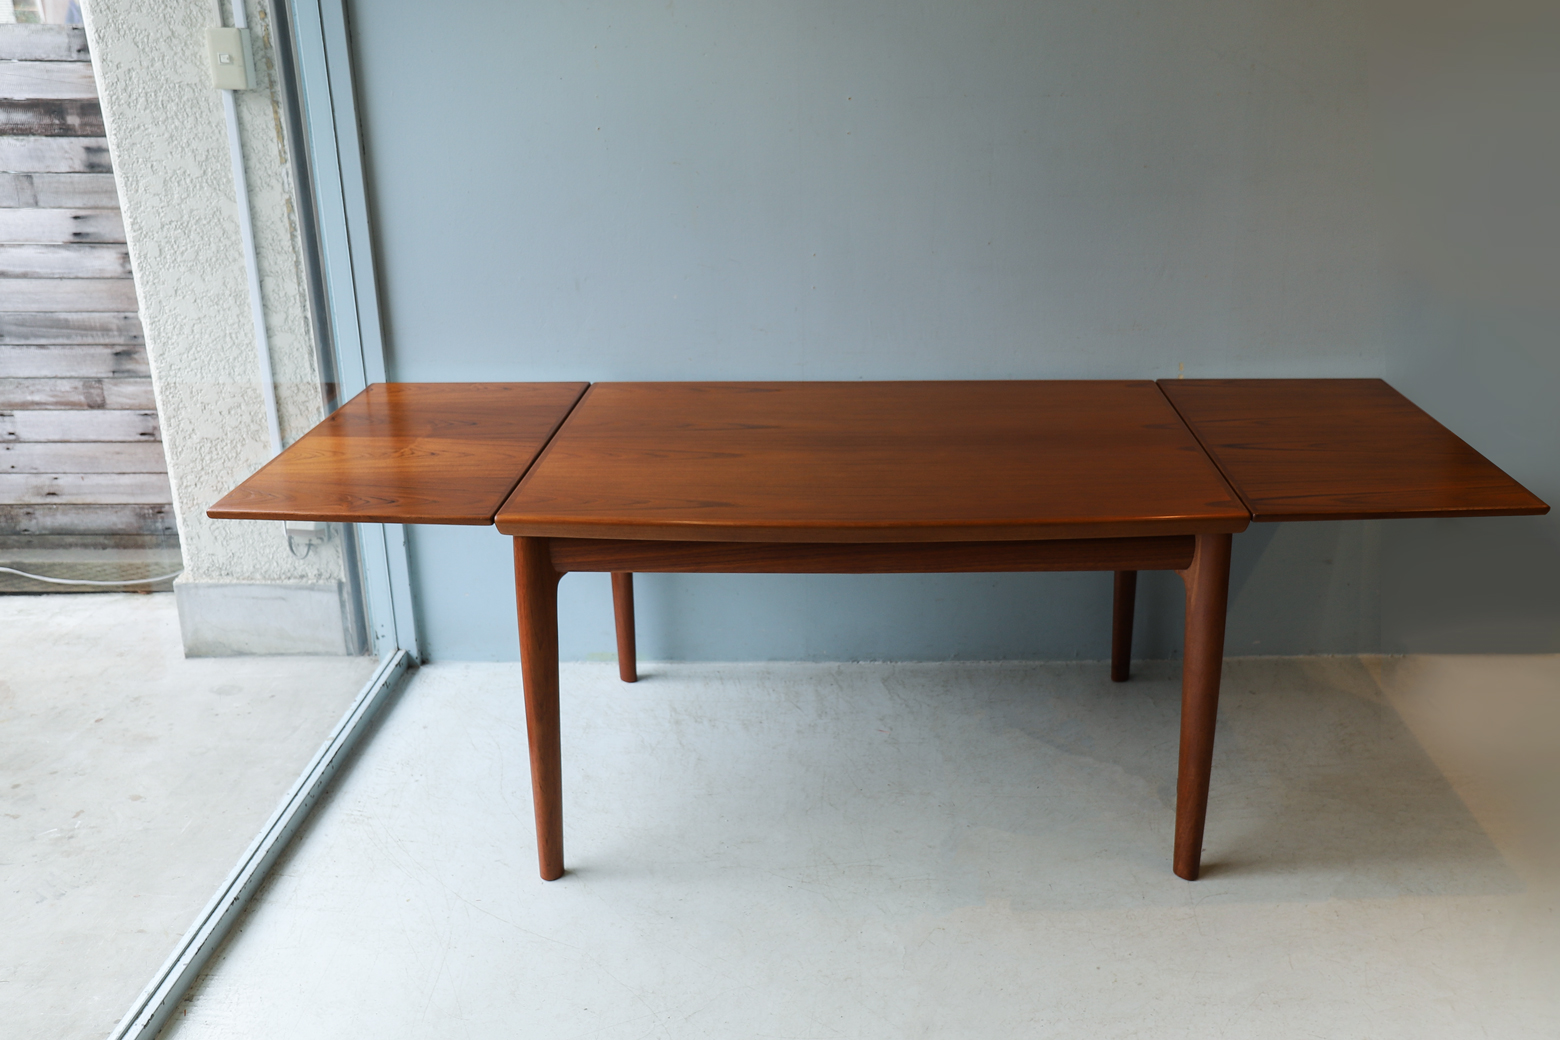 Glostrup Møbelfabrik Extension Dining Table Grete Jalk/デンマークヴィンテージ エクステンションダイニングテーブル グレーテ・ヤルク チーク材 北欧家具